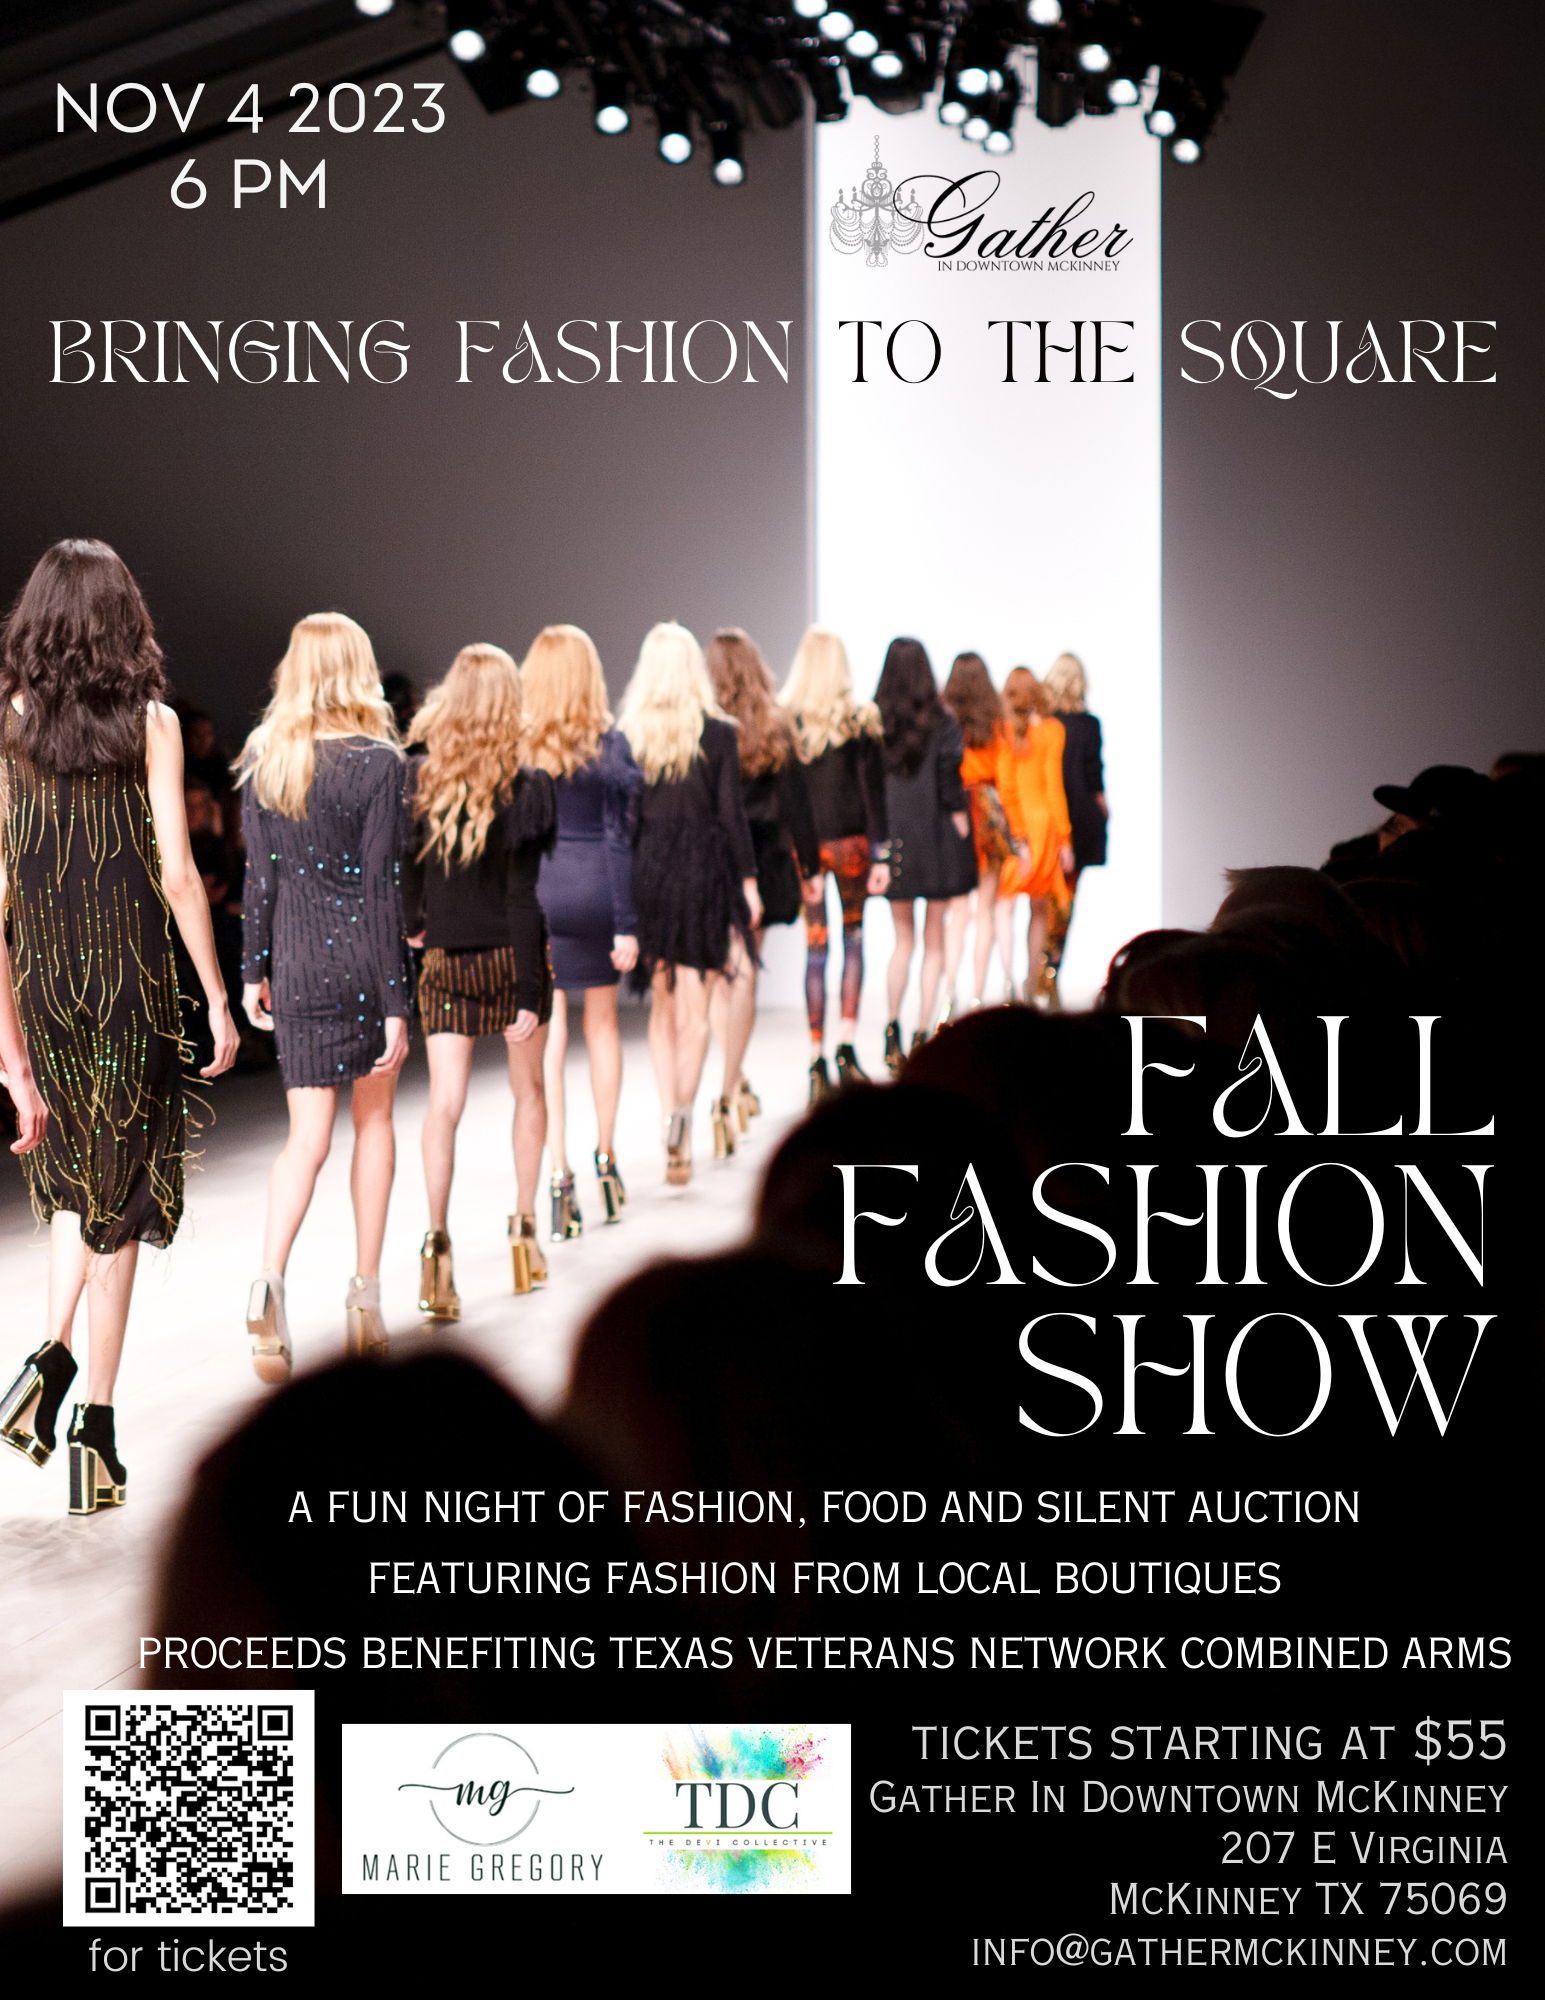 Bring Fashion to the Square